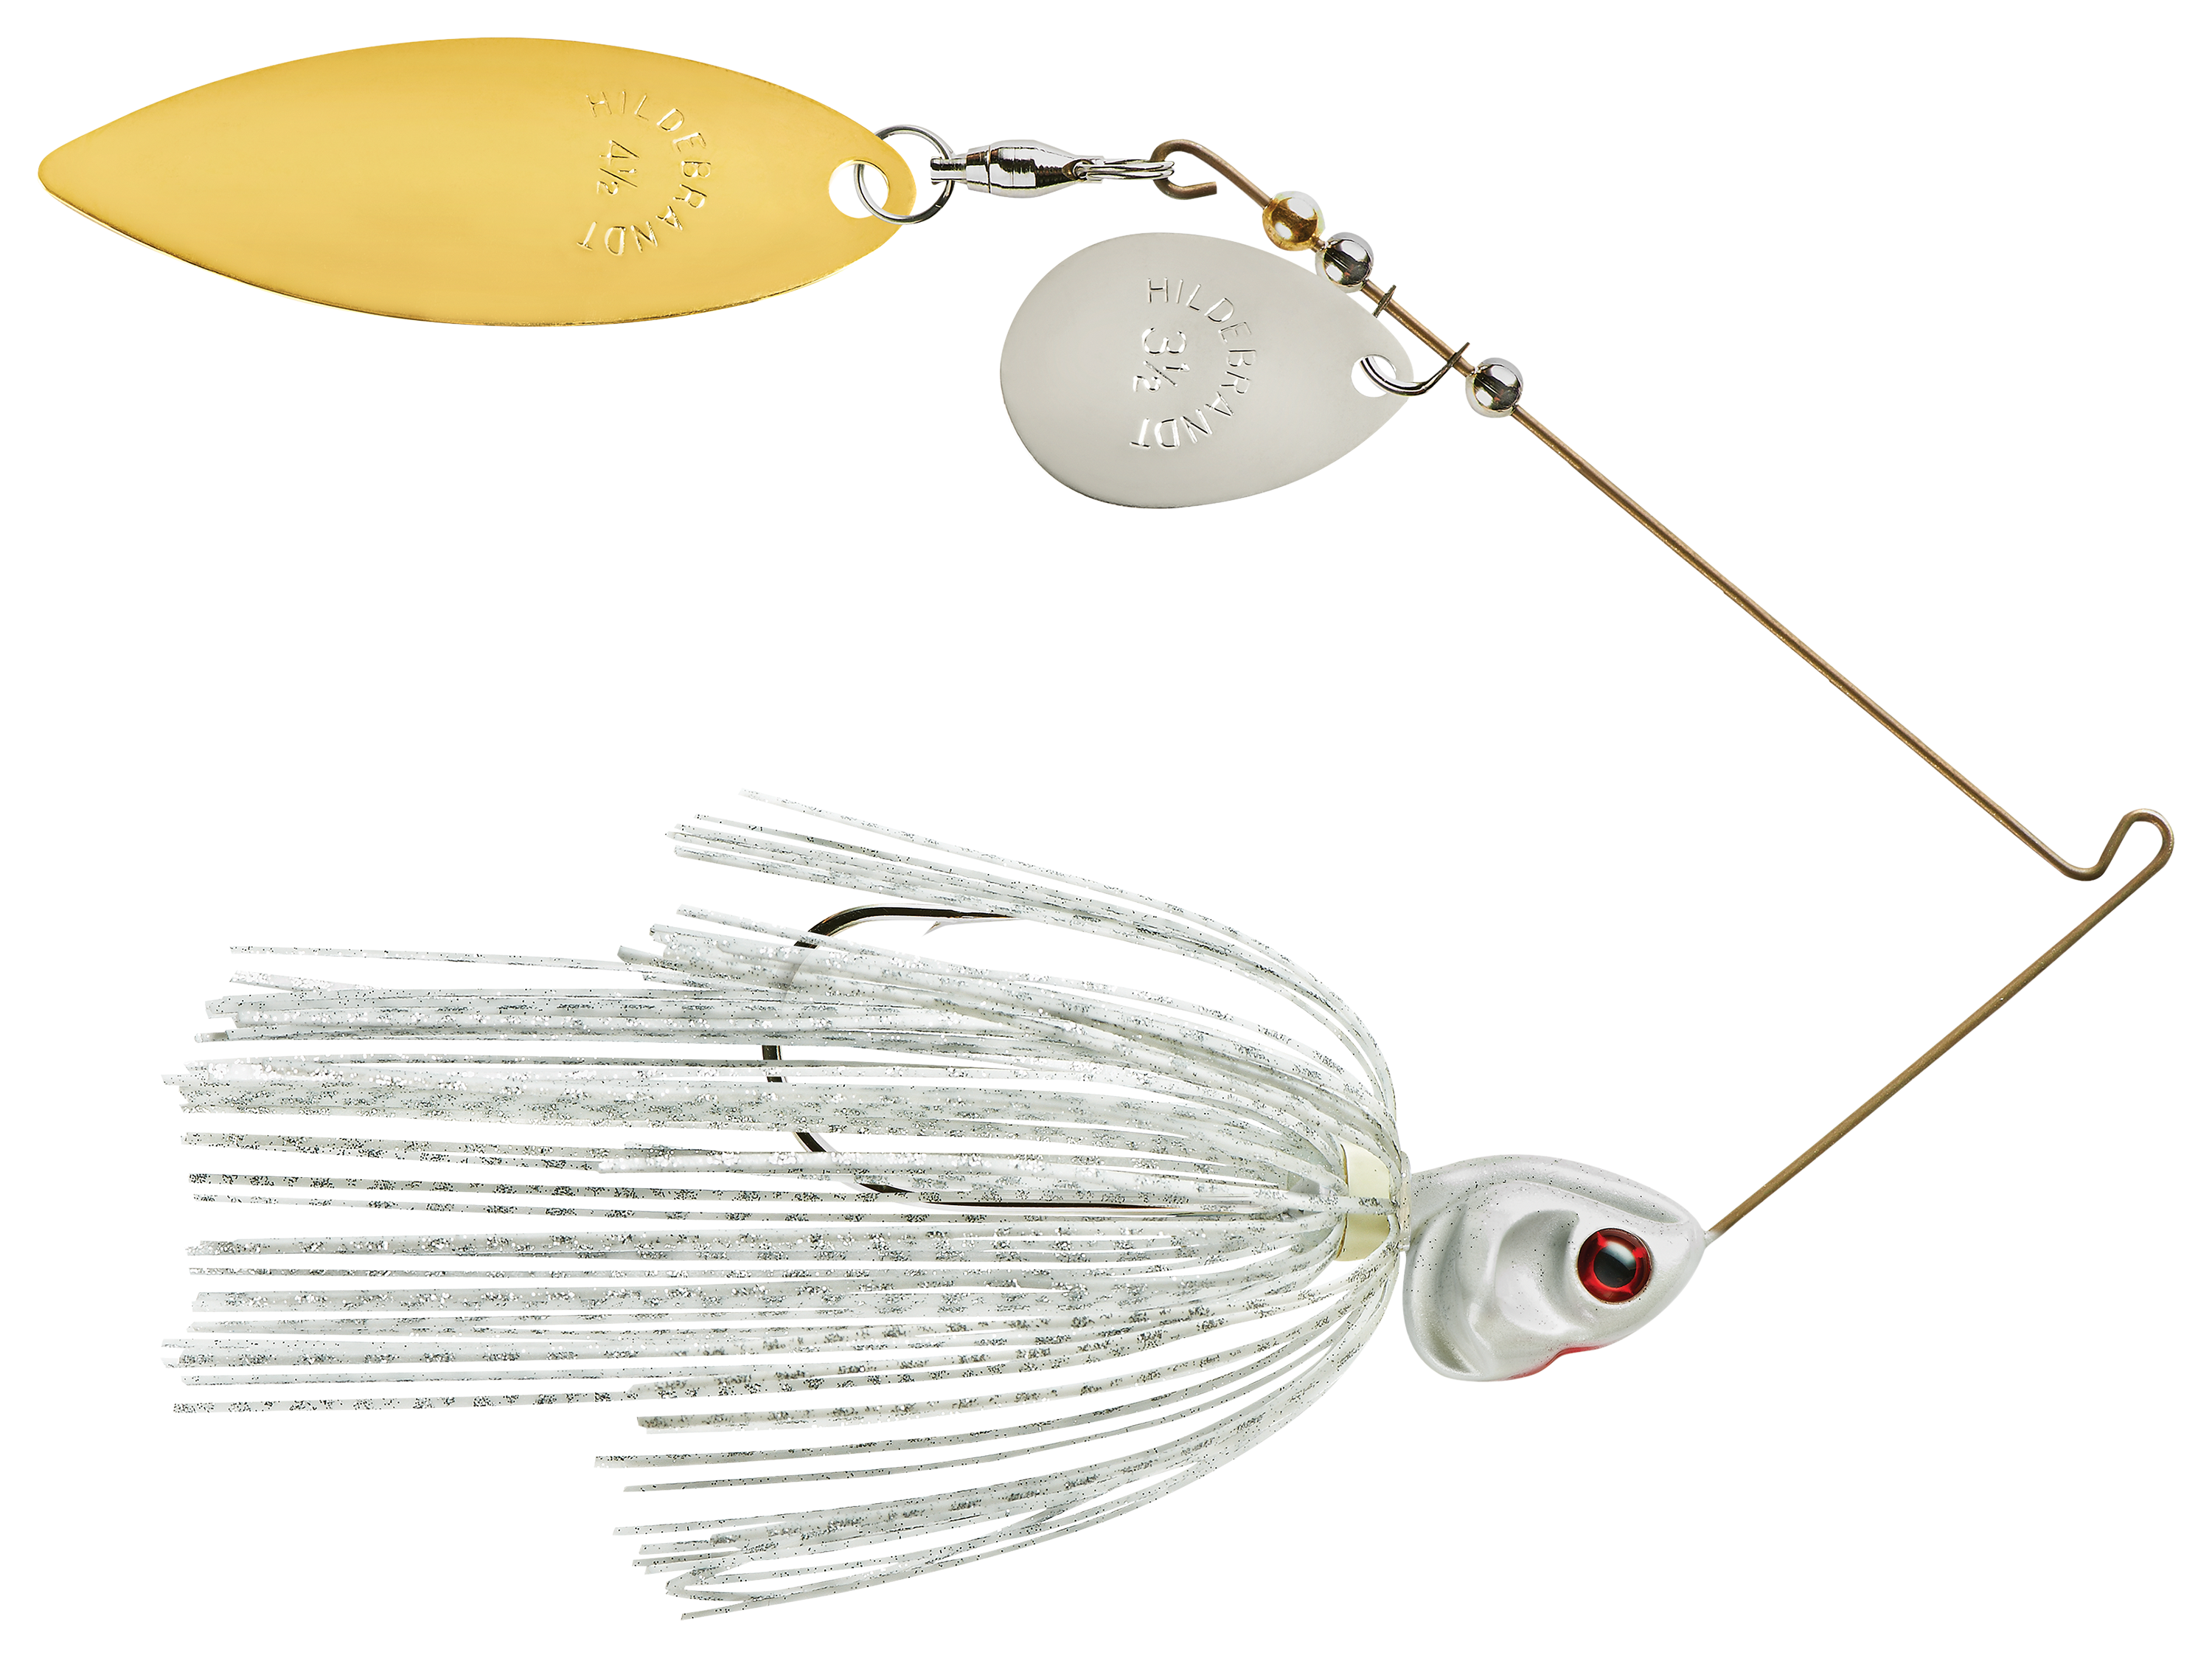 Booyah Tandem Blade Spinnerbait, White/Chartreuse